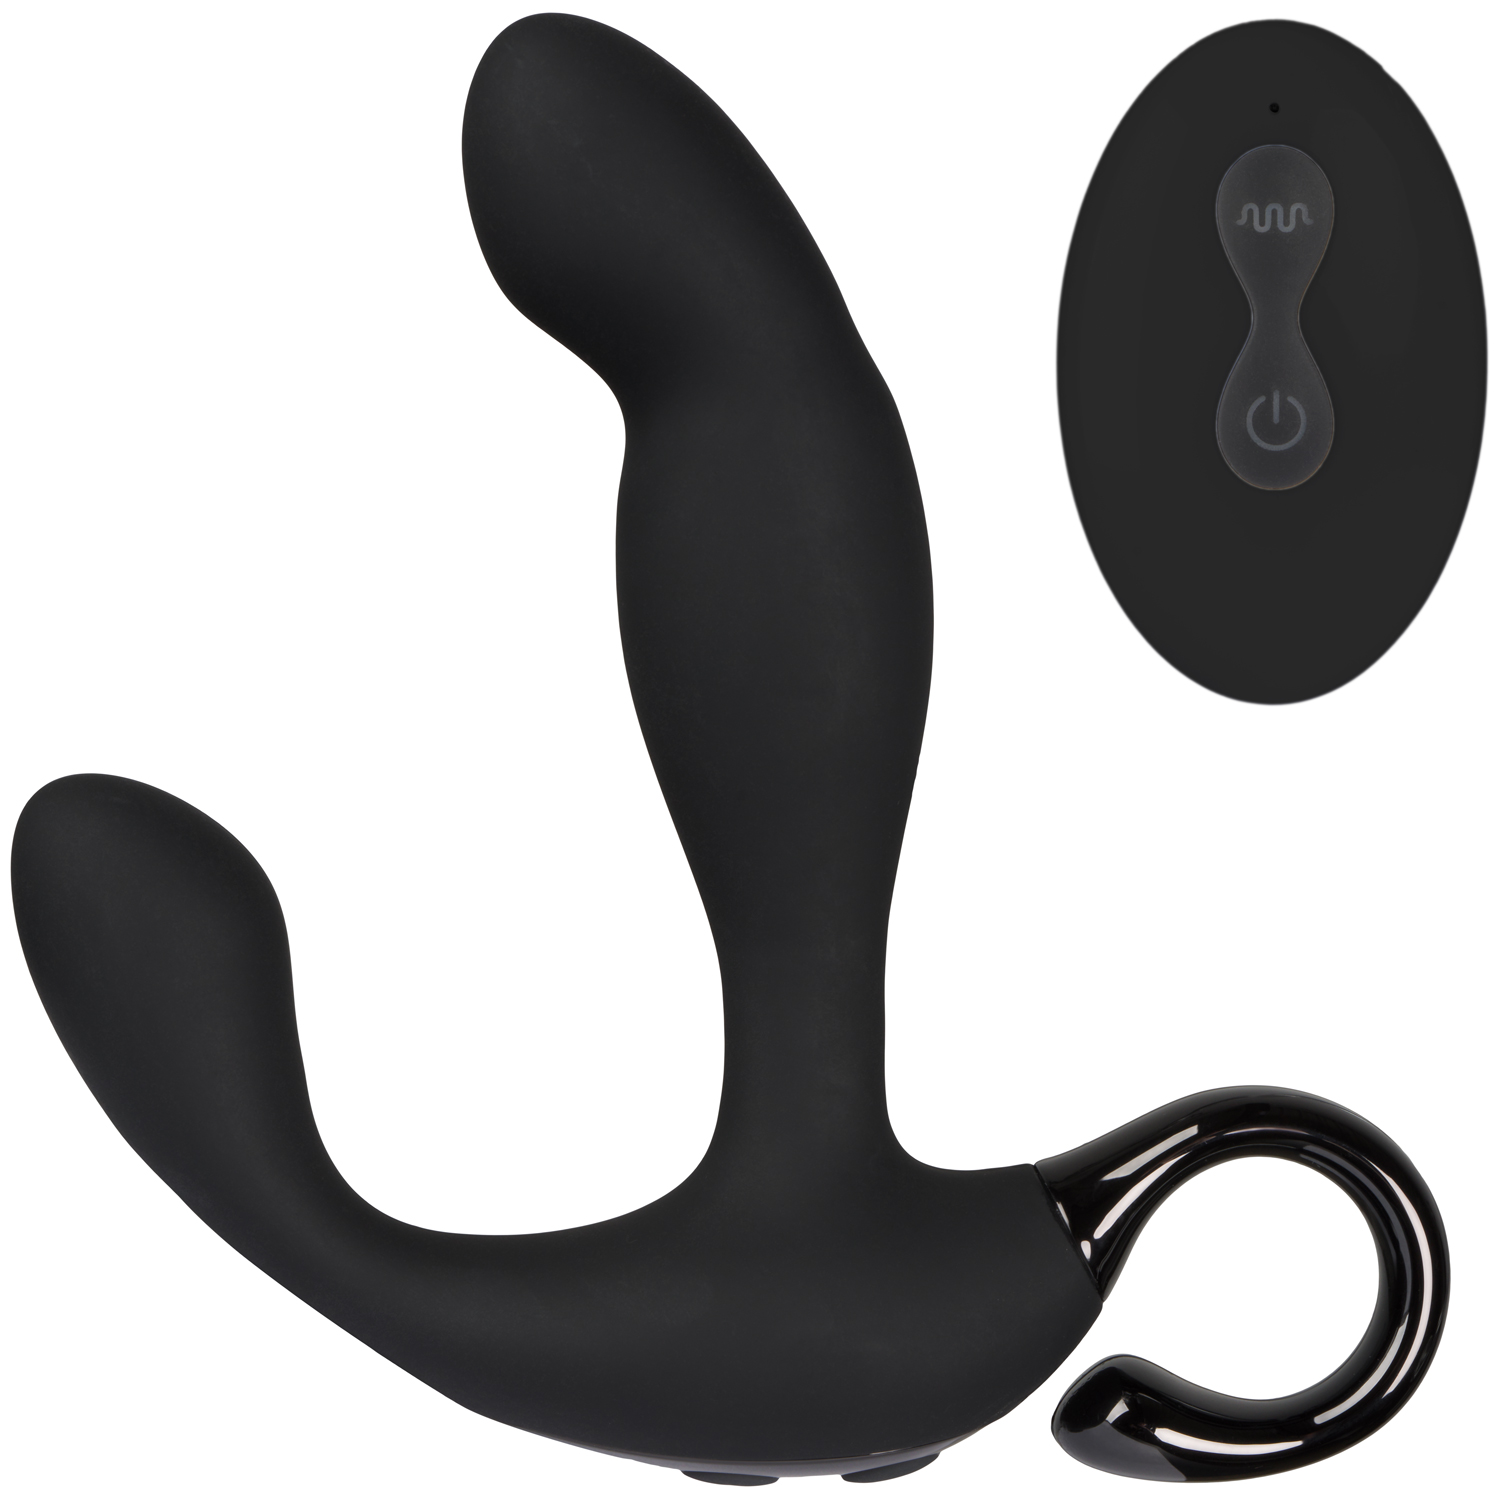 Sinful Come-hither Opladelig Prostata Vibrator      - Sort thumbnail